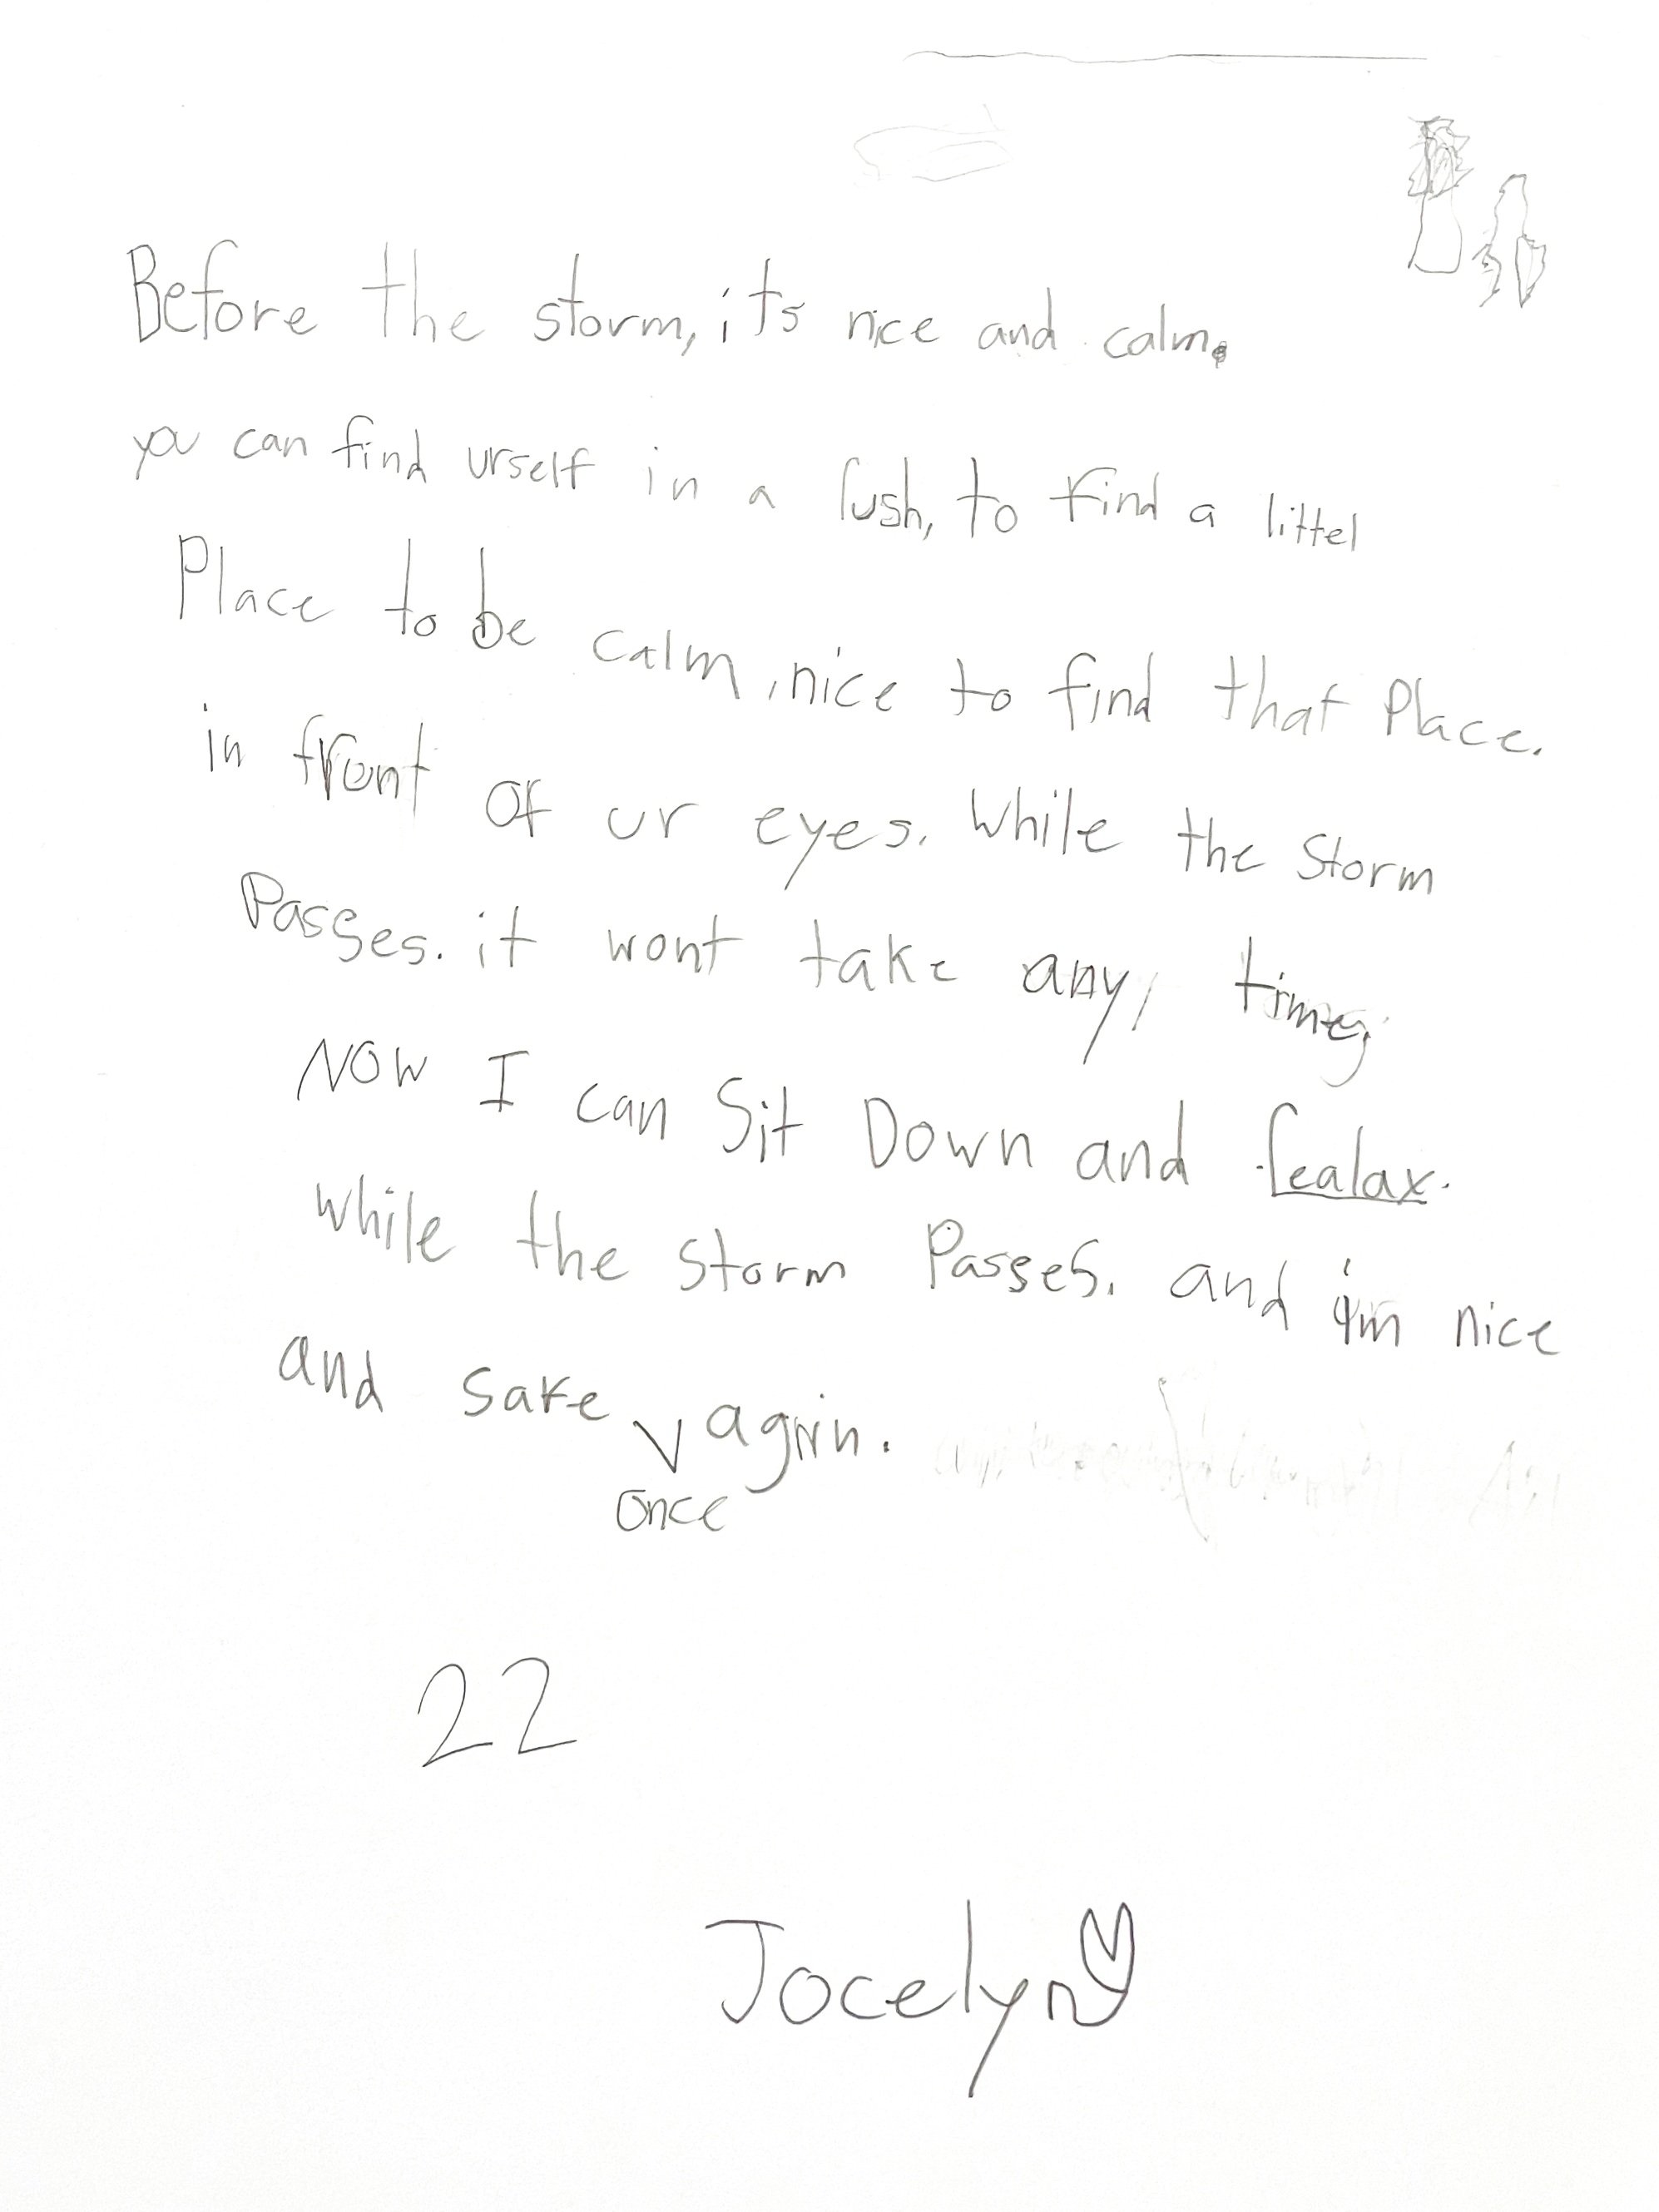 Poem written by Jocelyn, Age 9, Inspired by Jane Olin's Photograph "Intimate Conversation 22"